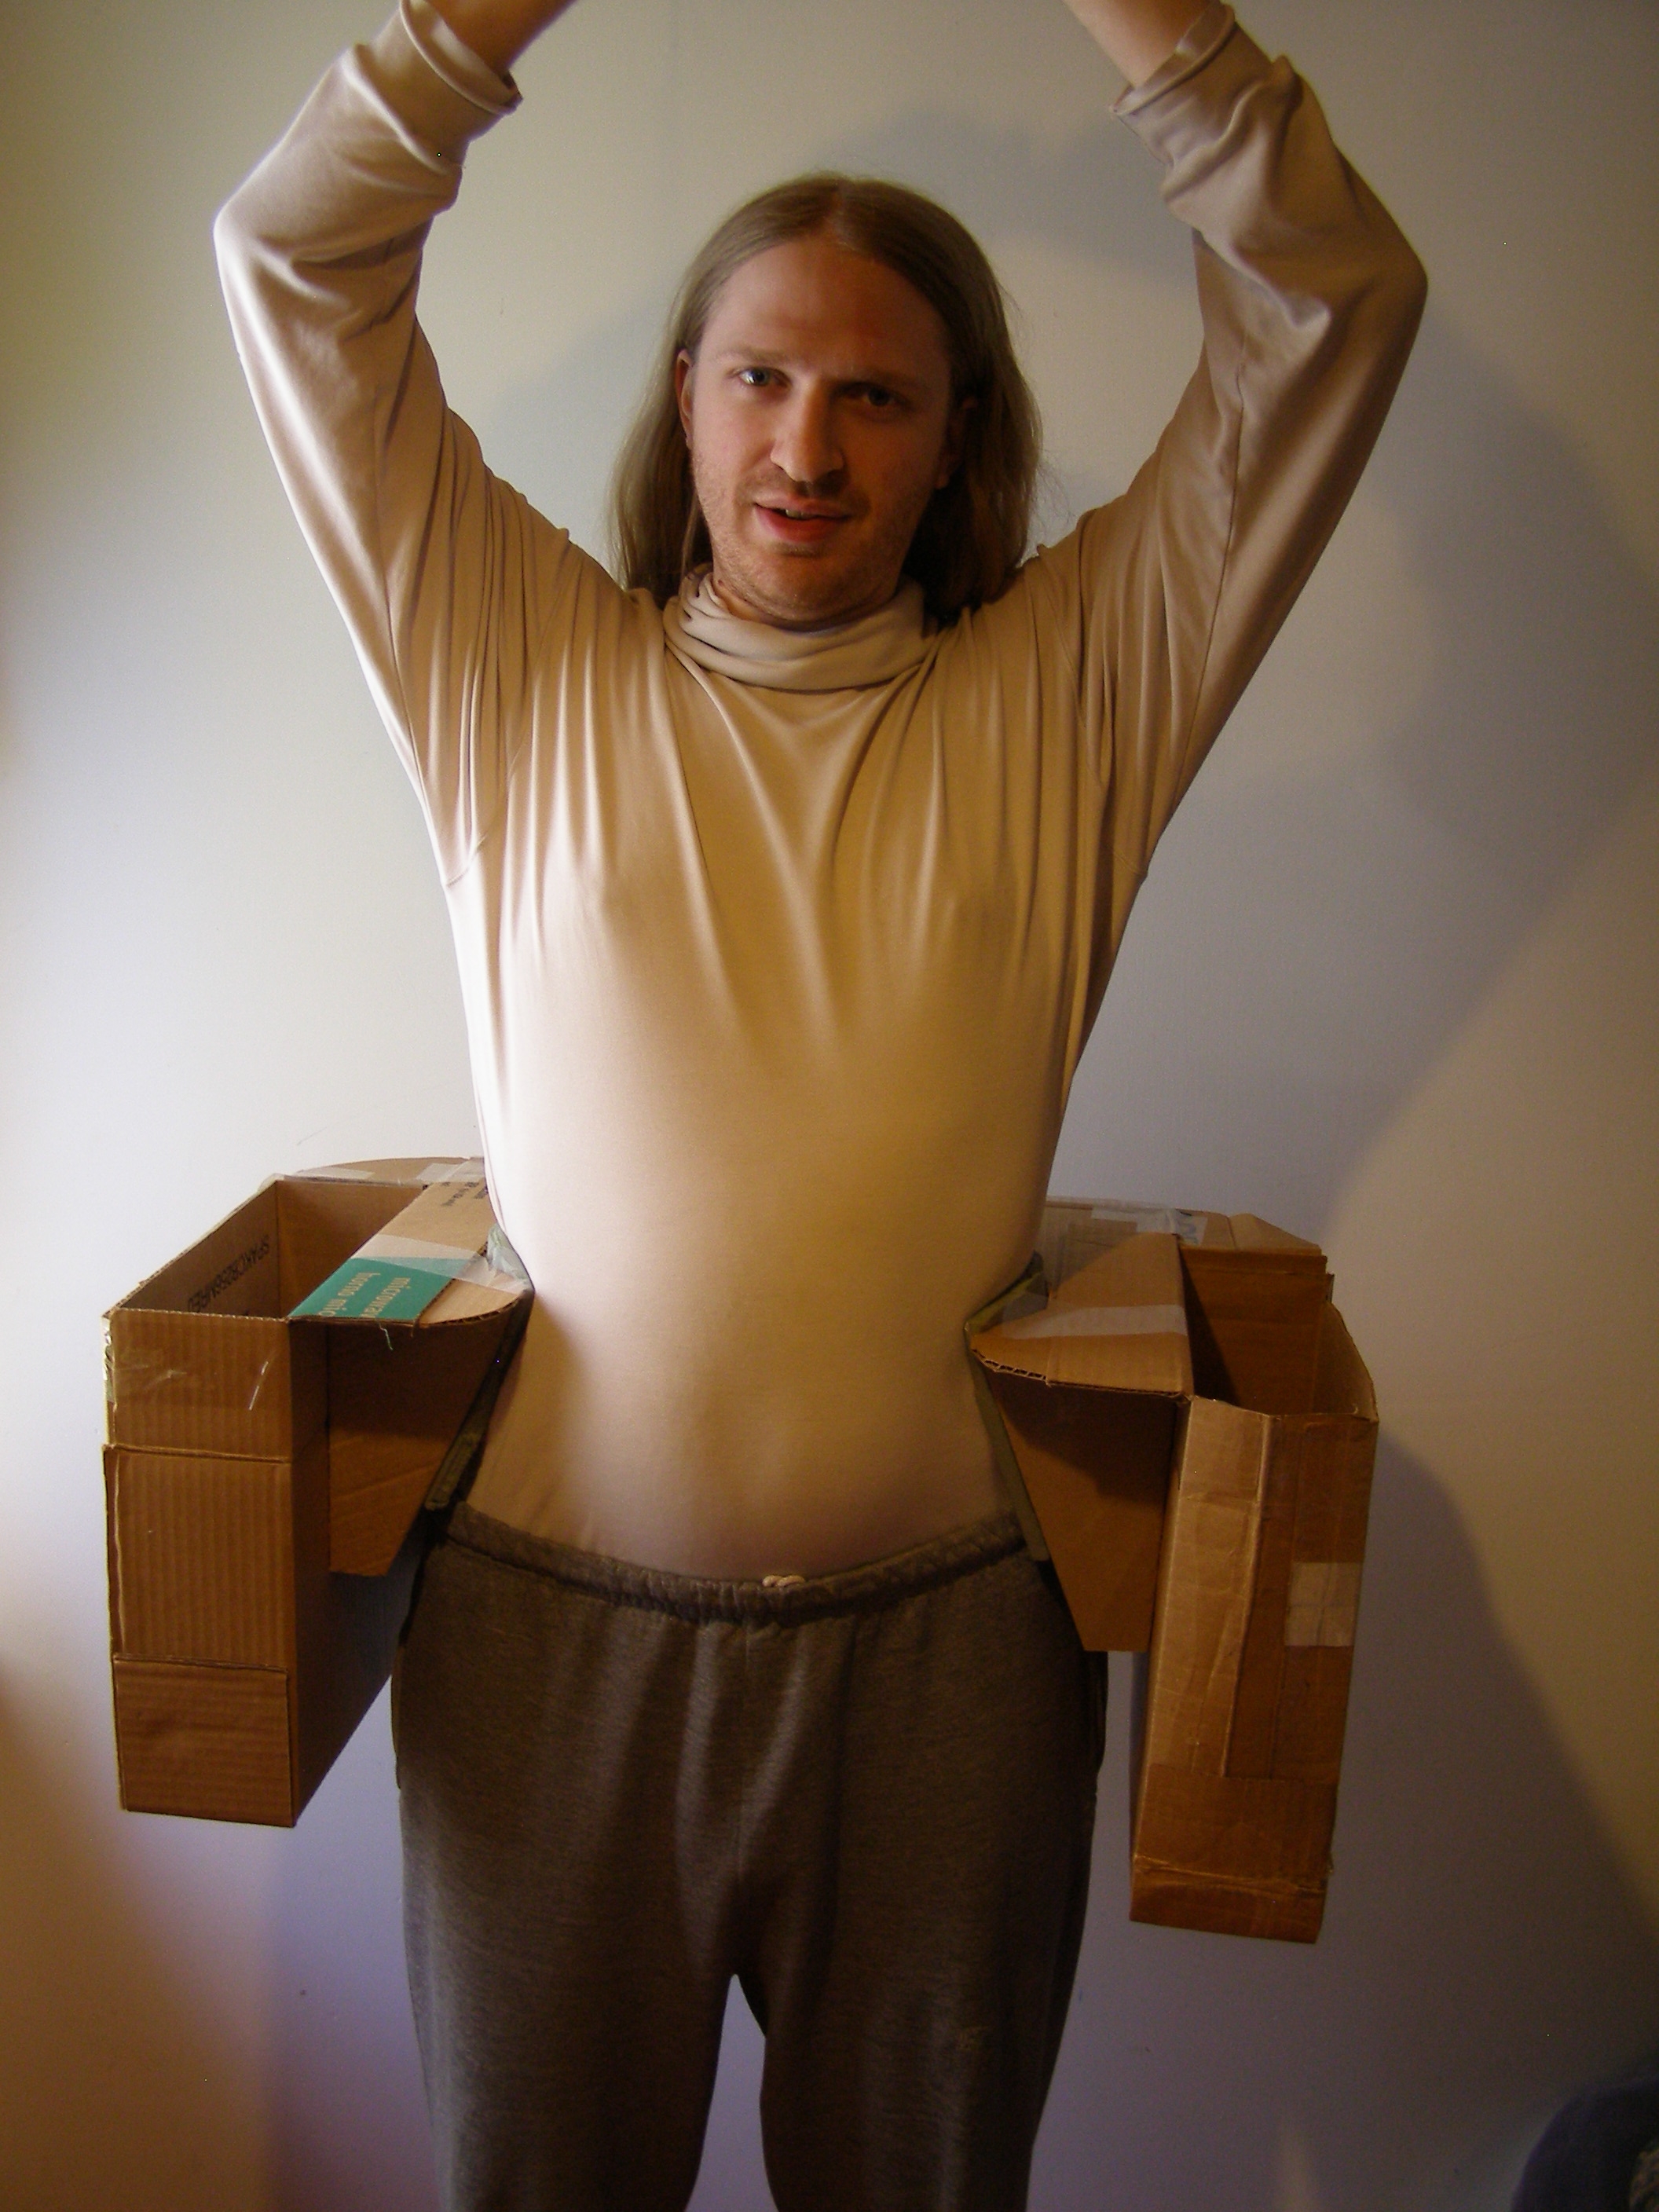 [Photo: Me, wearing Saddlebags 2.0 around my hips. They are a rectangular-ish cardboard contraption that supports two cardboard boxes at my sides.]